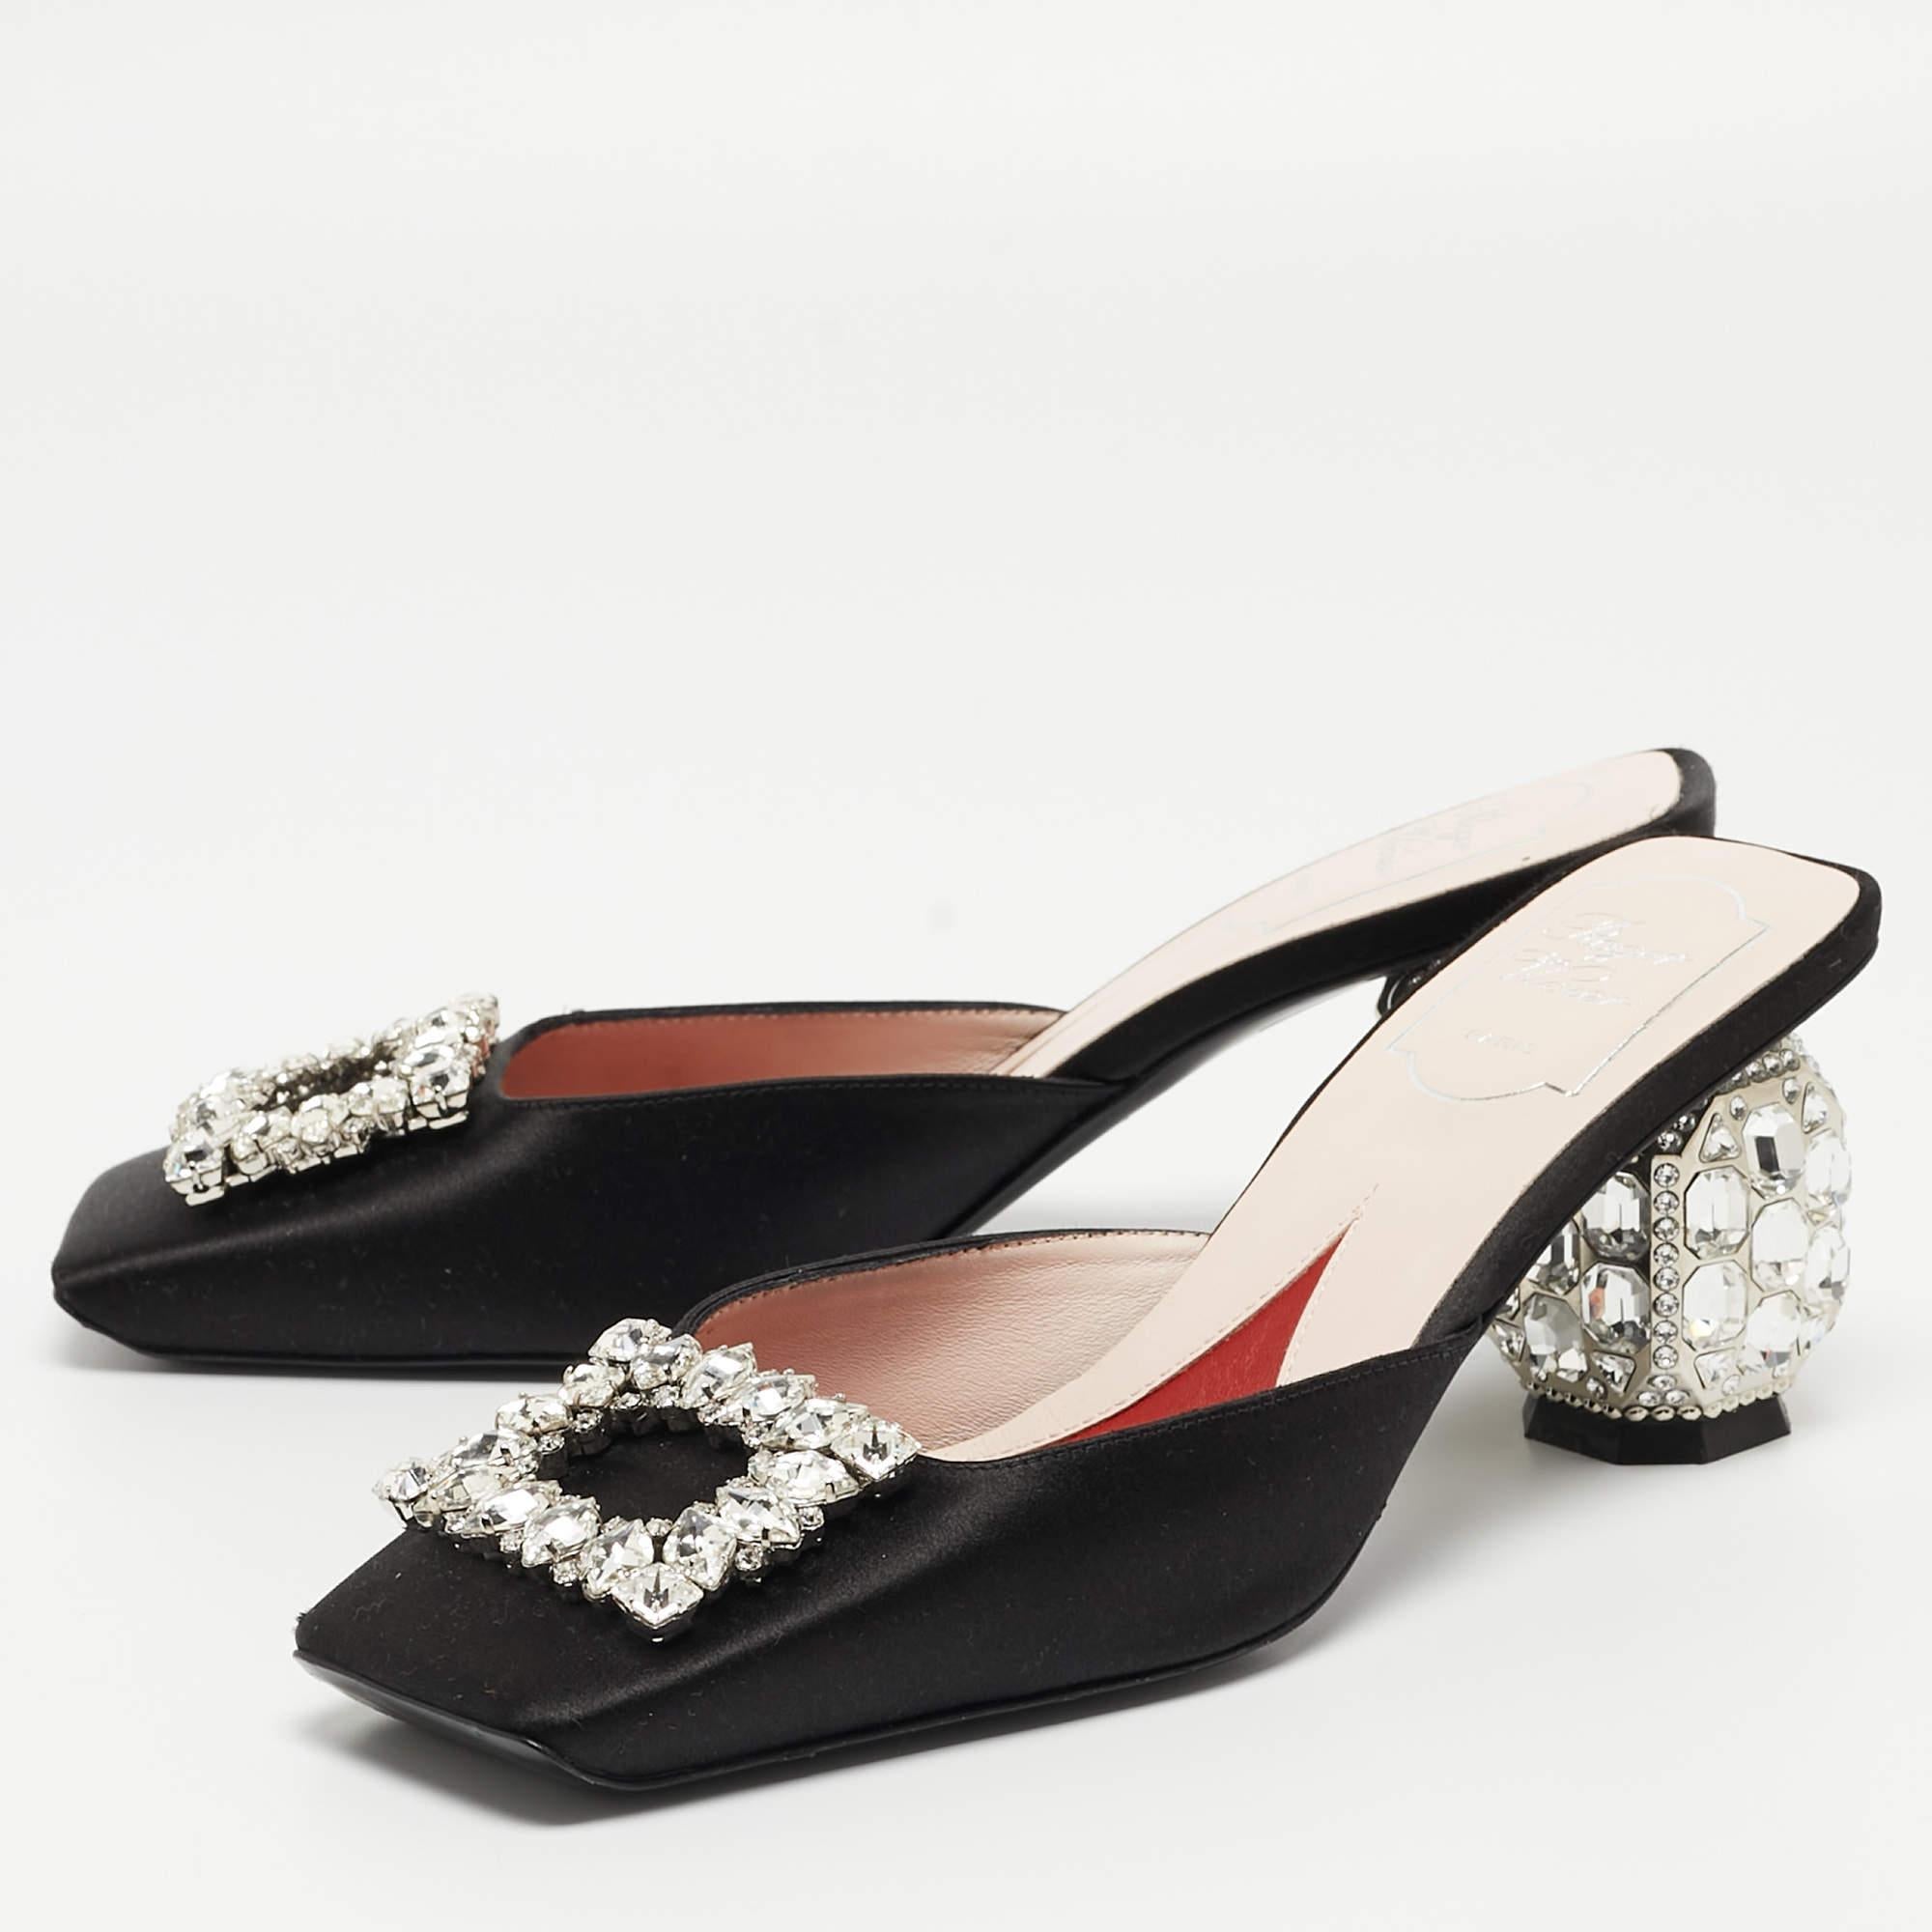 Designed exclusively for you, this Roger Vivier pair is versatile. Crafted with satin, these slide mules feature crystal-embellished buckle detail on the vamps, comfortable soles and a fabulous style. Keep it light and casual with this stunning